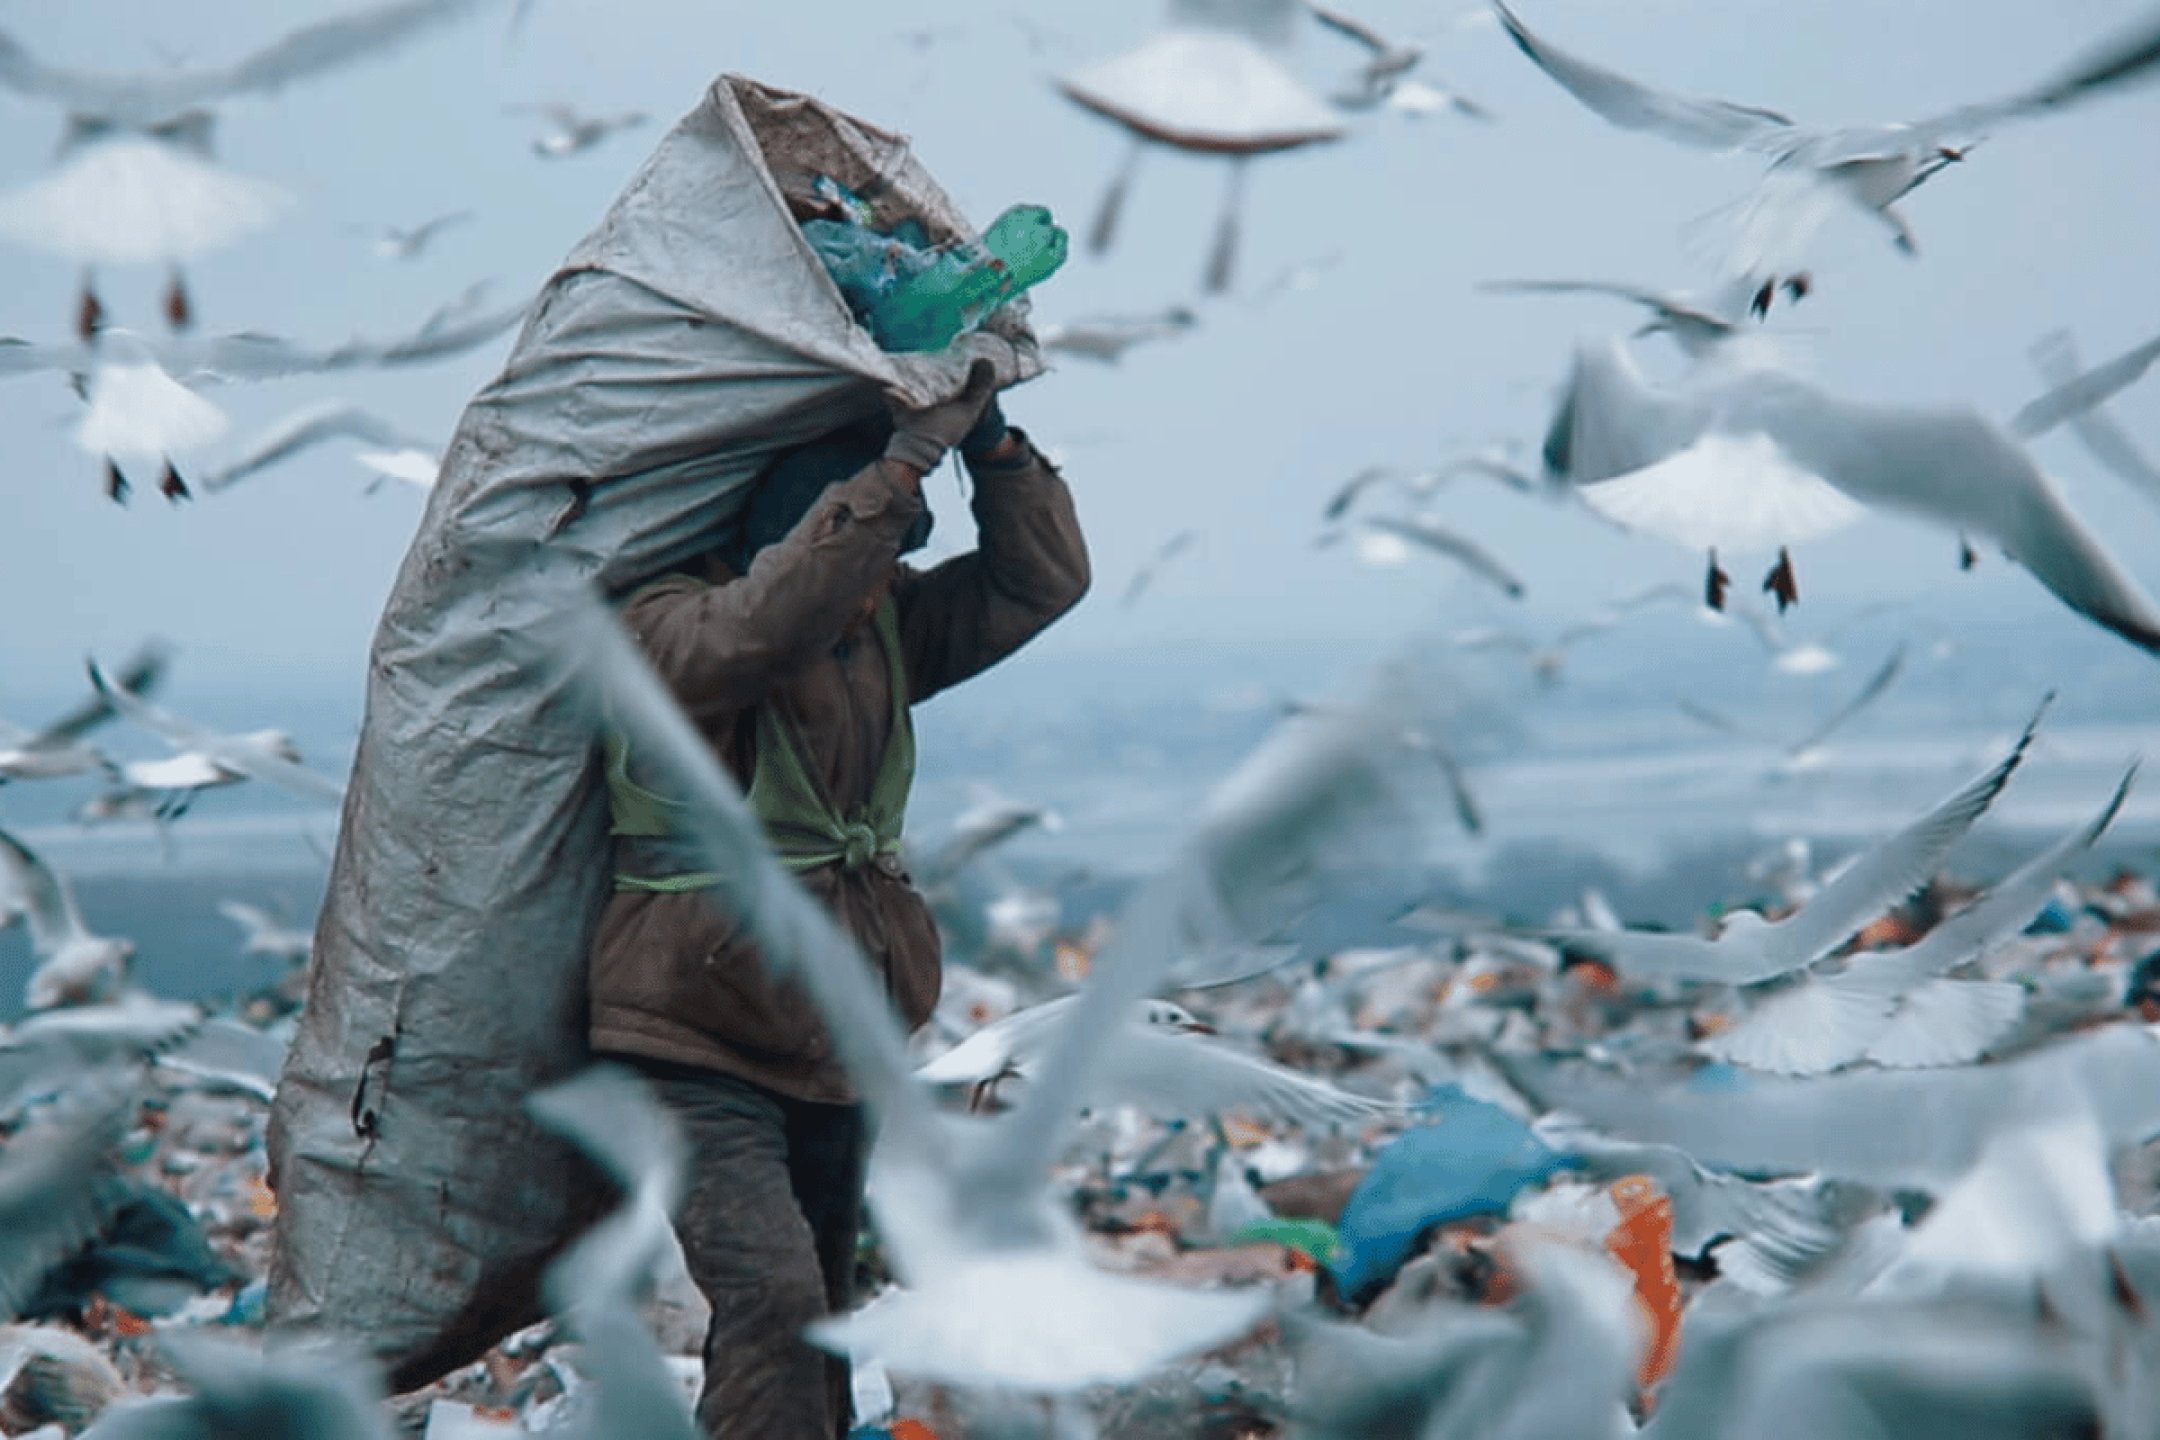 A person carries a full garbage bag while walking in between seagulls at a beach covered with garbage.